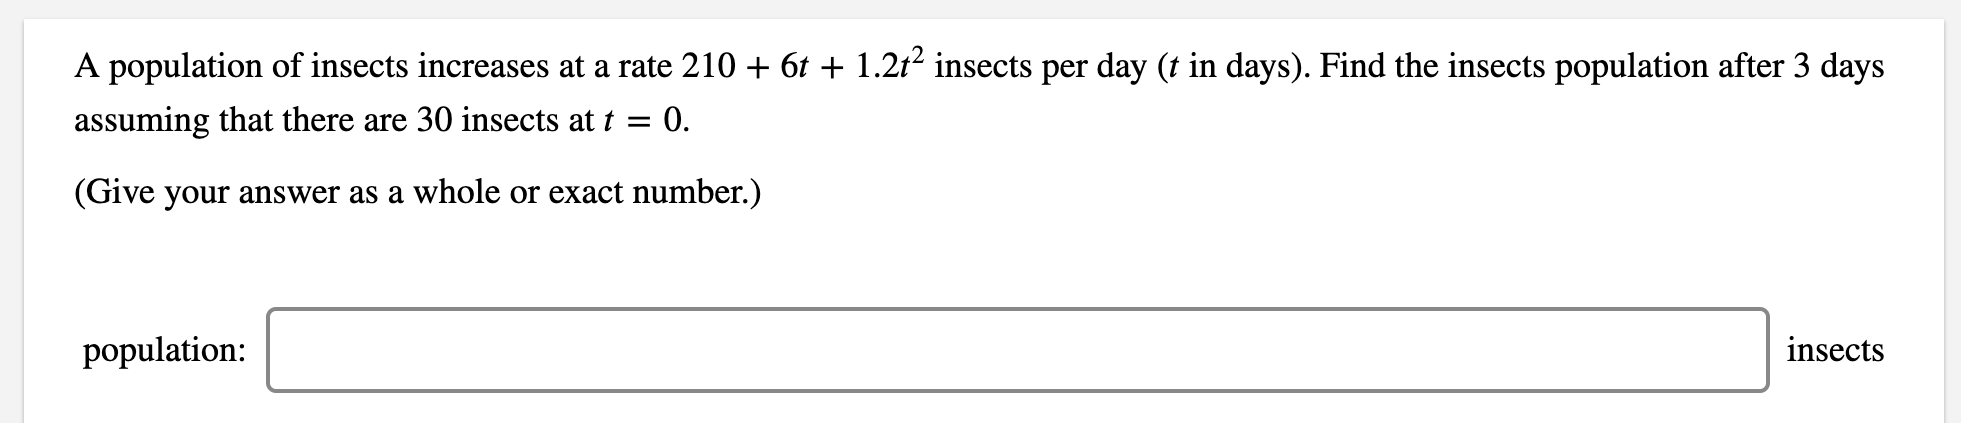 A population of insects increases at a rate 210 + 6t + 1.2t² insects per day (t in days). Find the insects population after 3 days
assuming that there are 30 insects at t =
0.
(Give your answer as a whole or exact number.)
population:
insects
